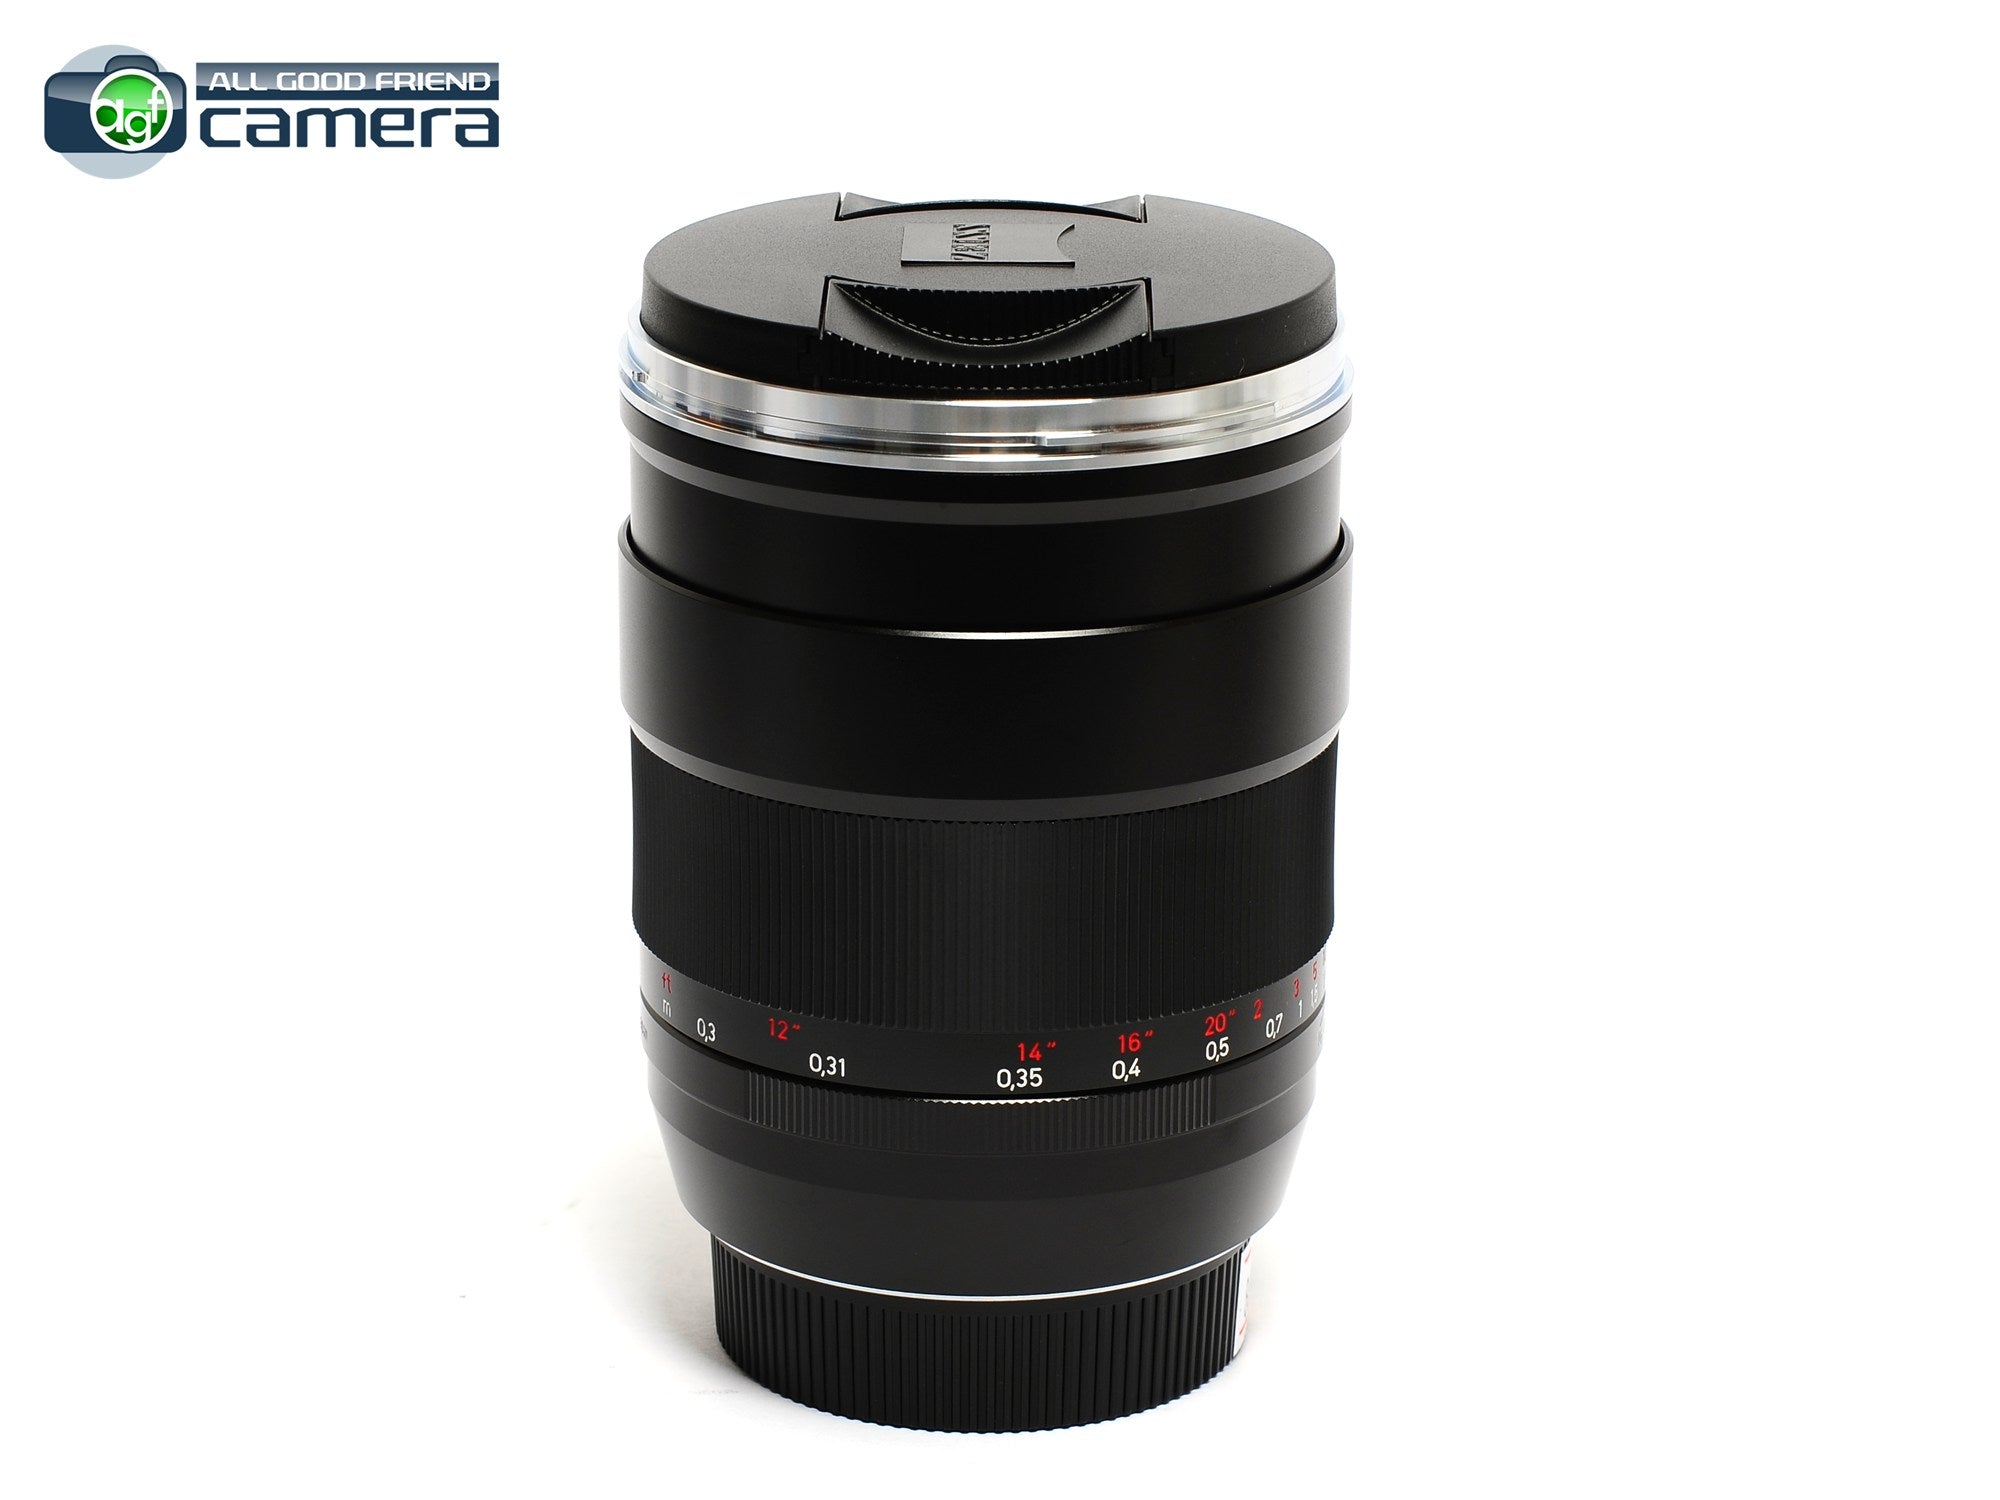 Carl Zeiss Distagon 35mm f2 ZE canon ef-